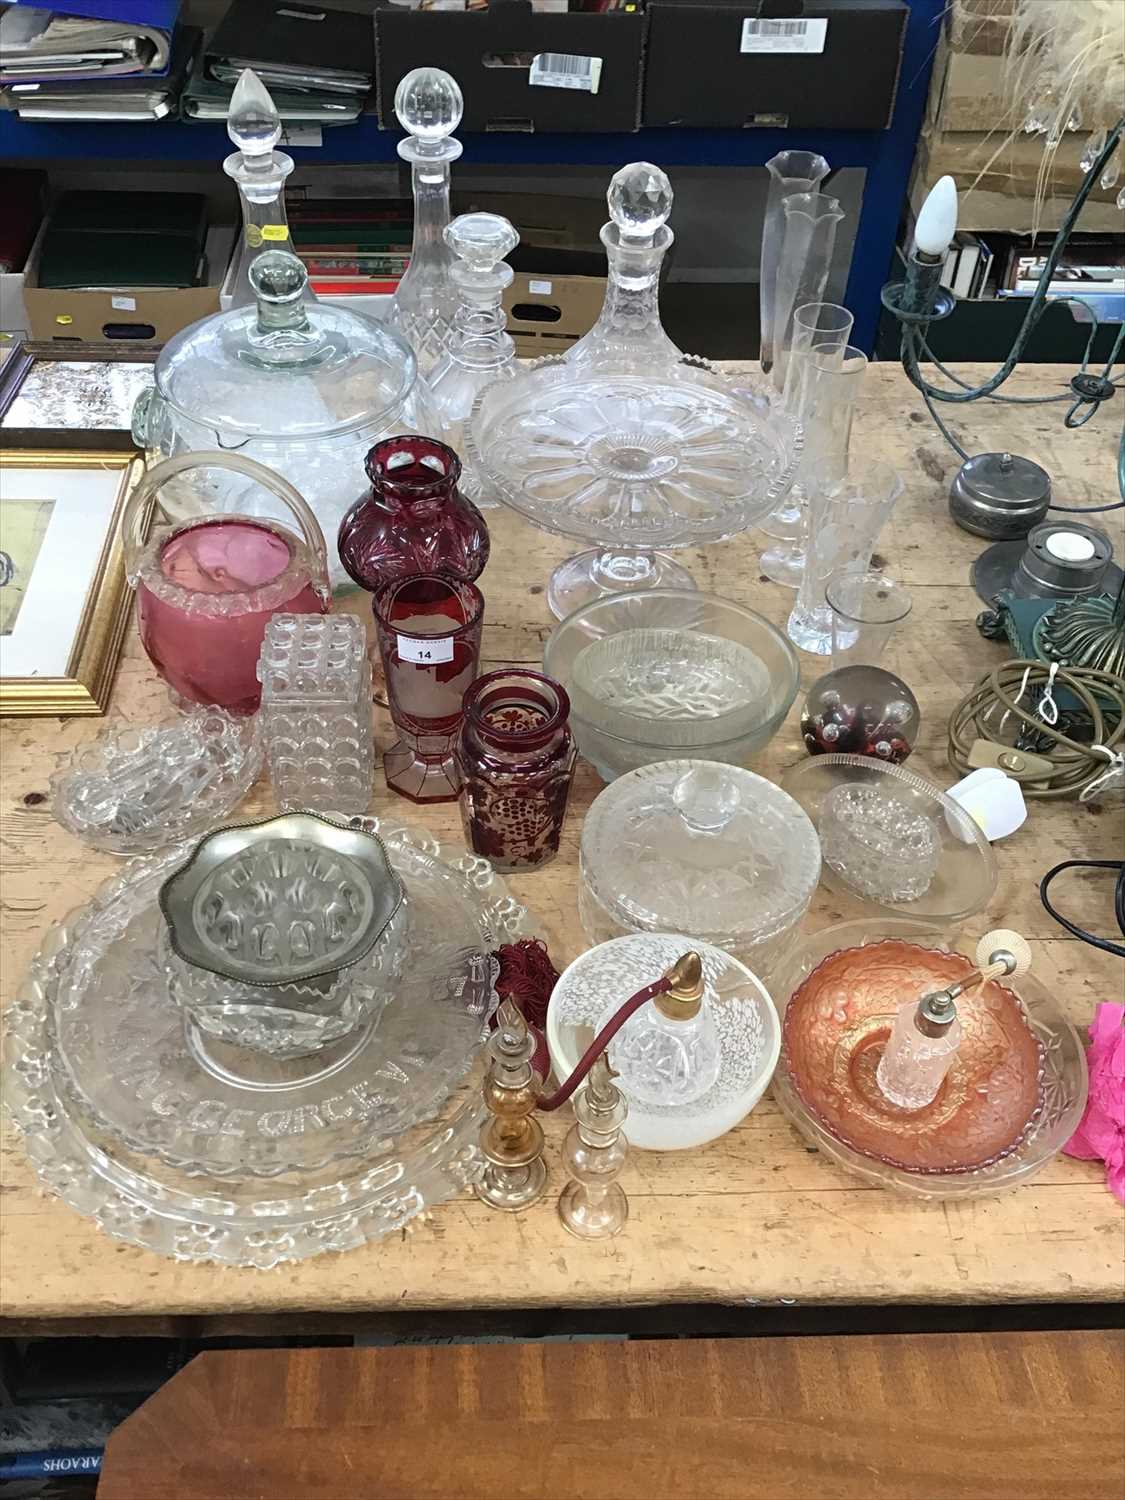 Lot 14 - Collection of glassware, including decanters, Bohemian glass, atomisers, scent bottles, etc